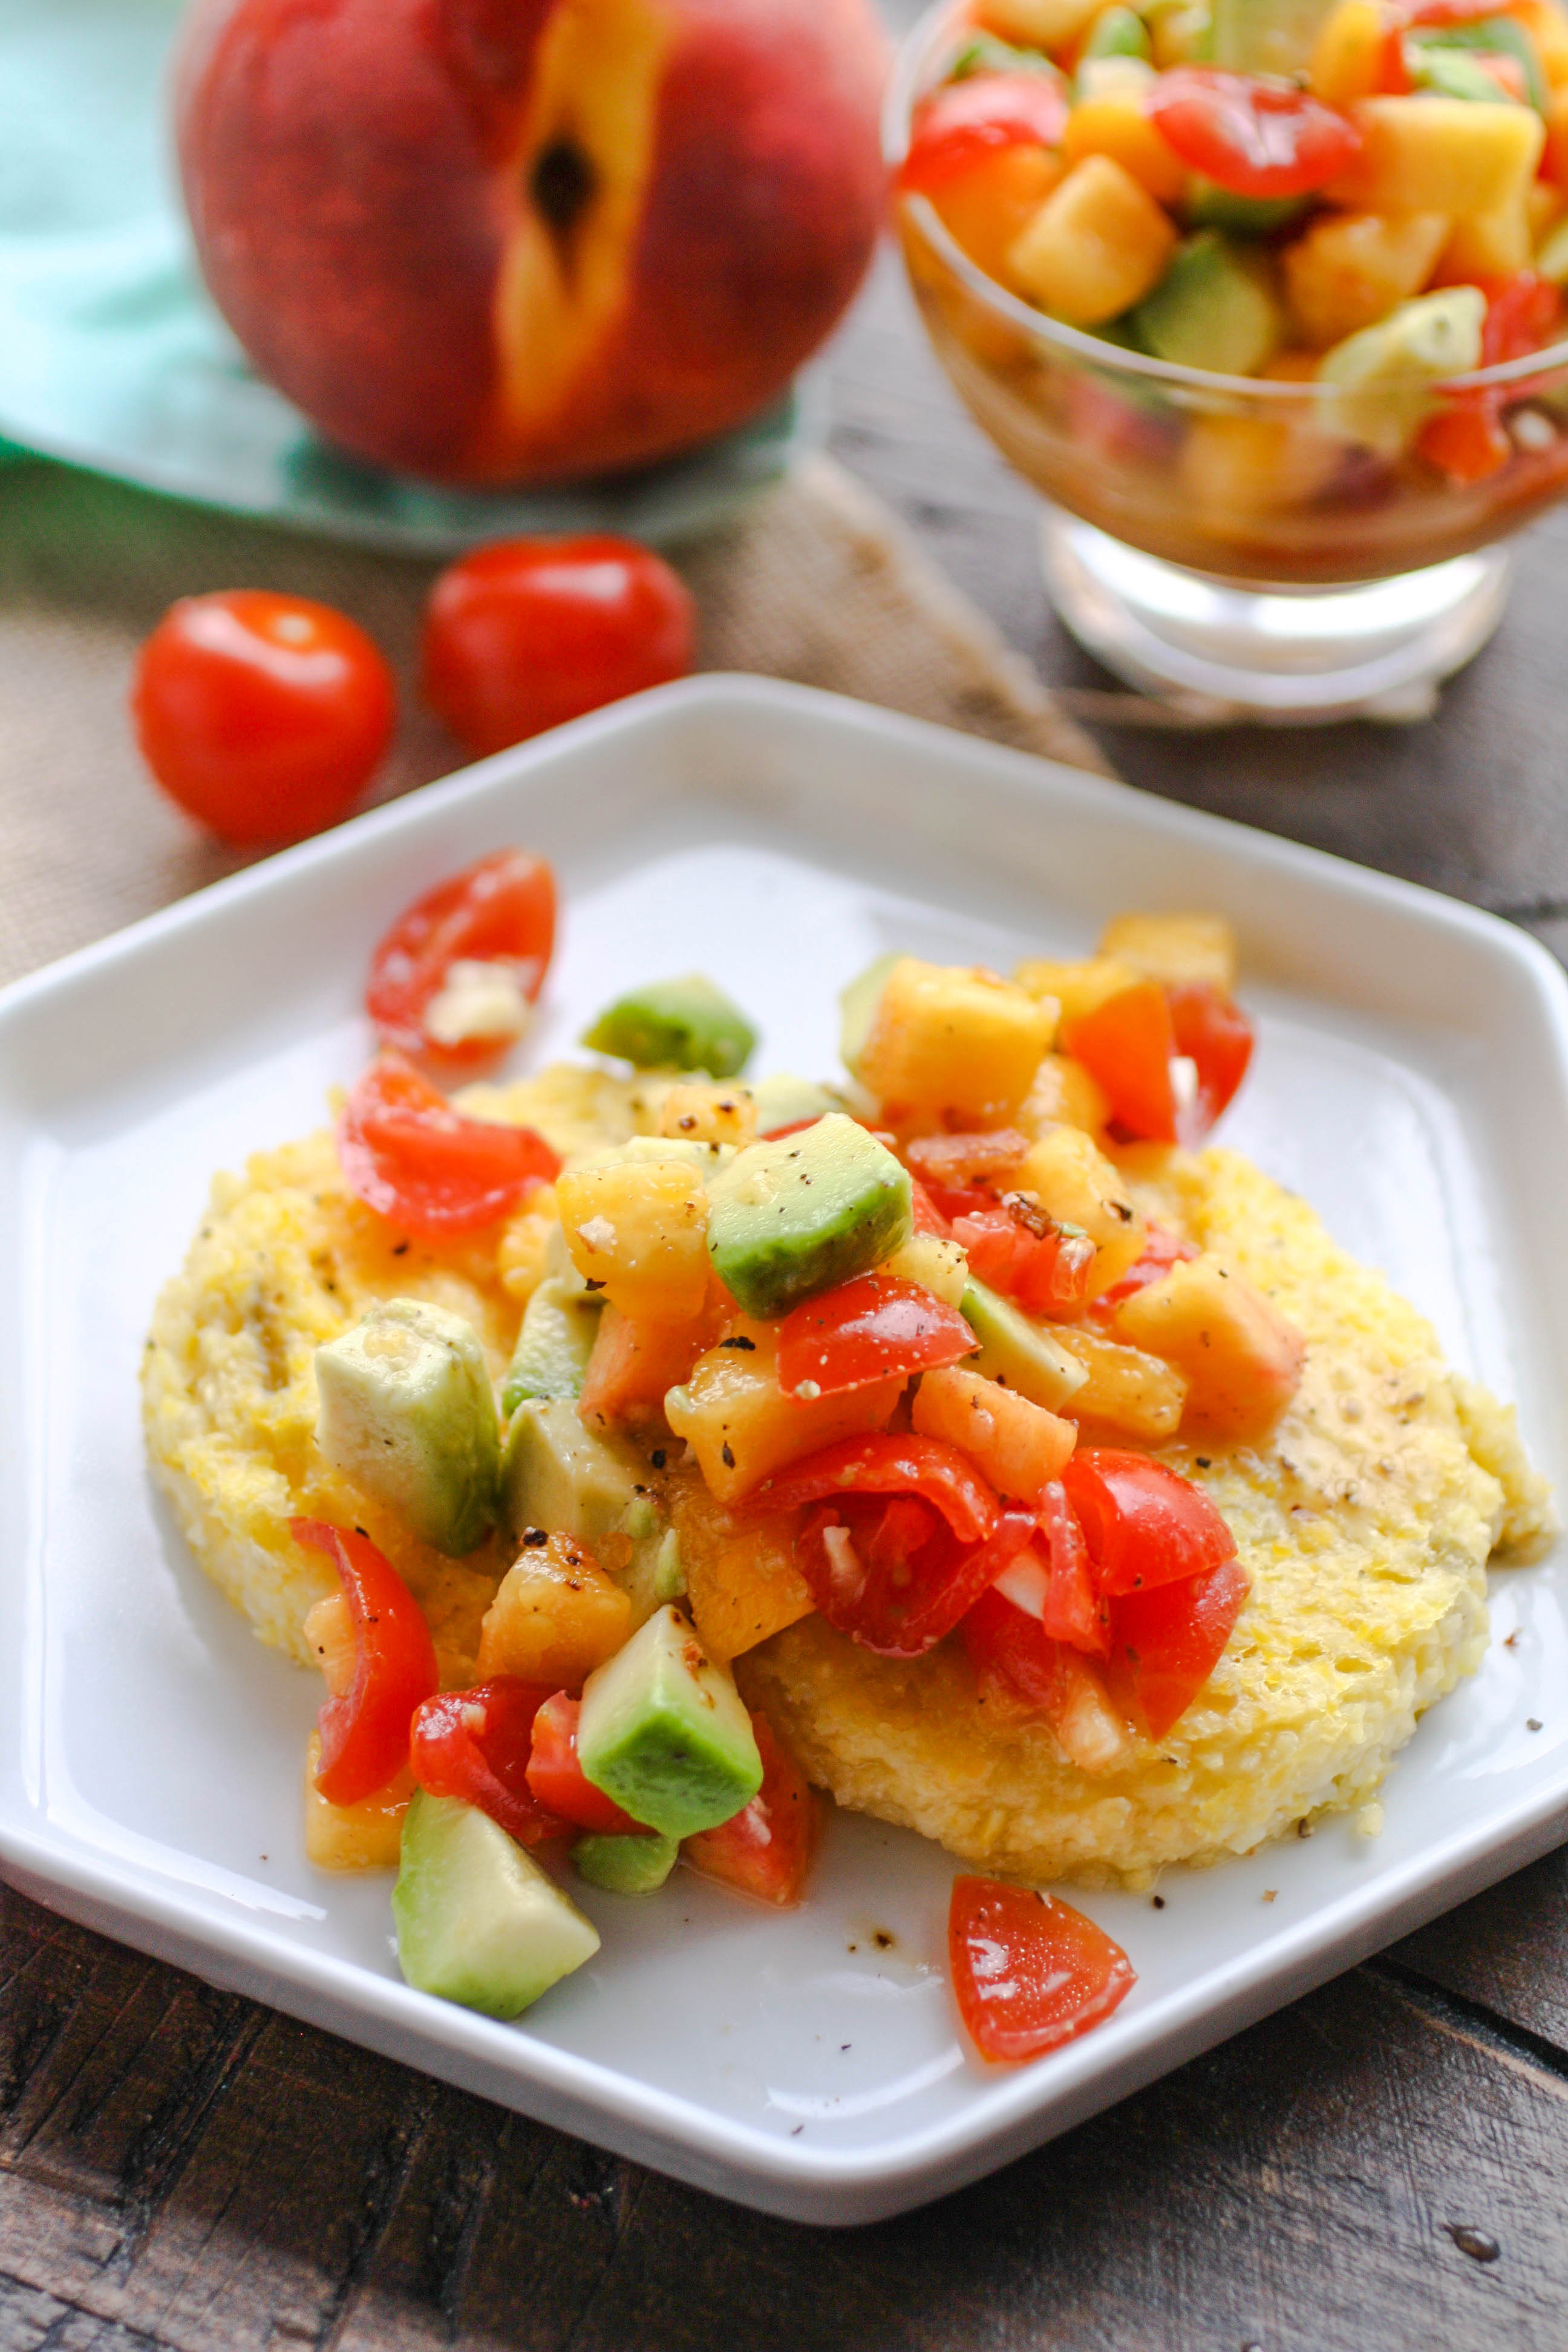 Hatch Chile Grits Cakes with Peach-Citrus Salsa is a great appetizer for the season! You'll love Hatch Chile Grits Cakes with Peach-Citrus Salsa.